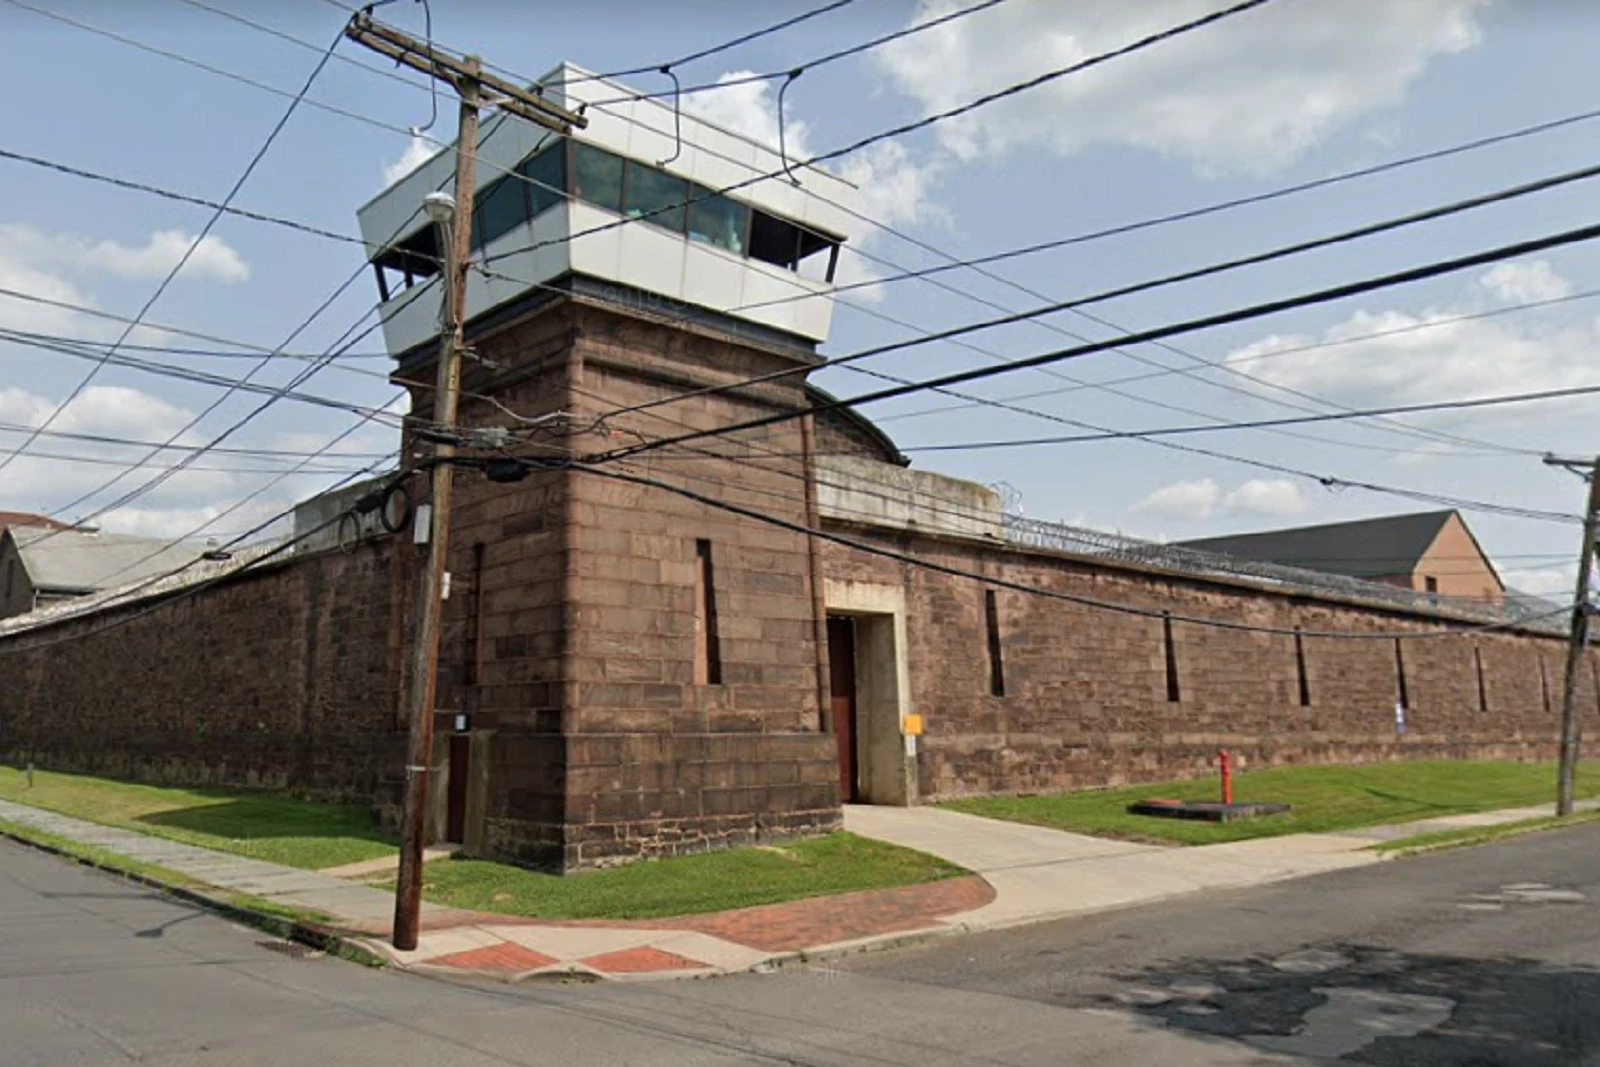 Activists push for aid in NJ prisons, where 43 died from COVID-19